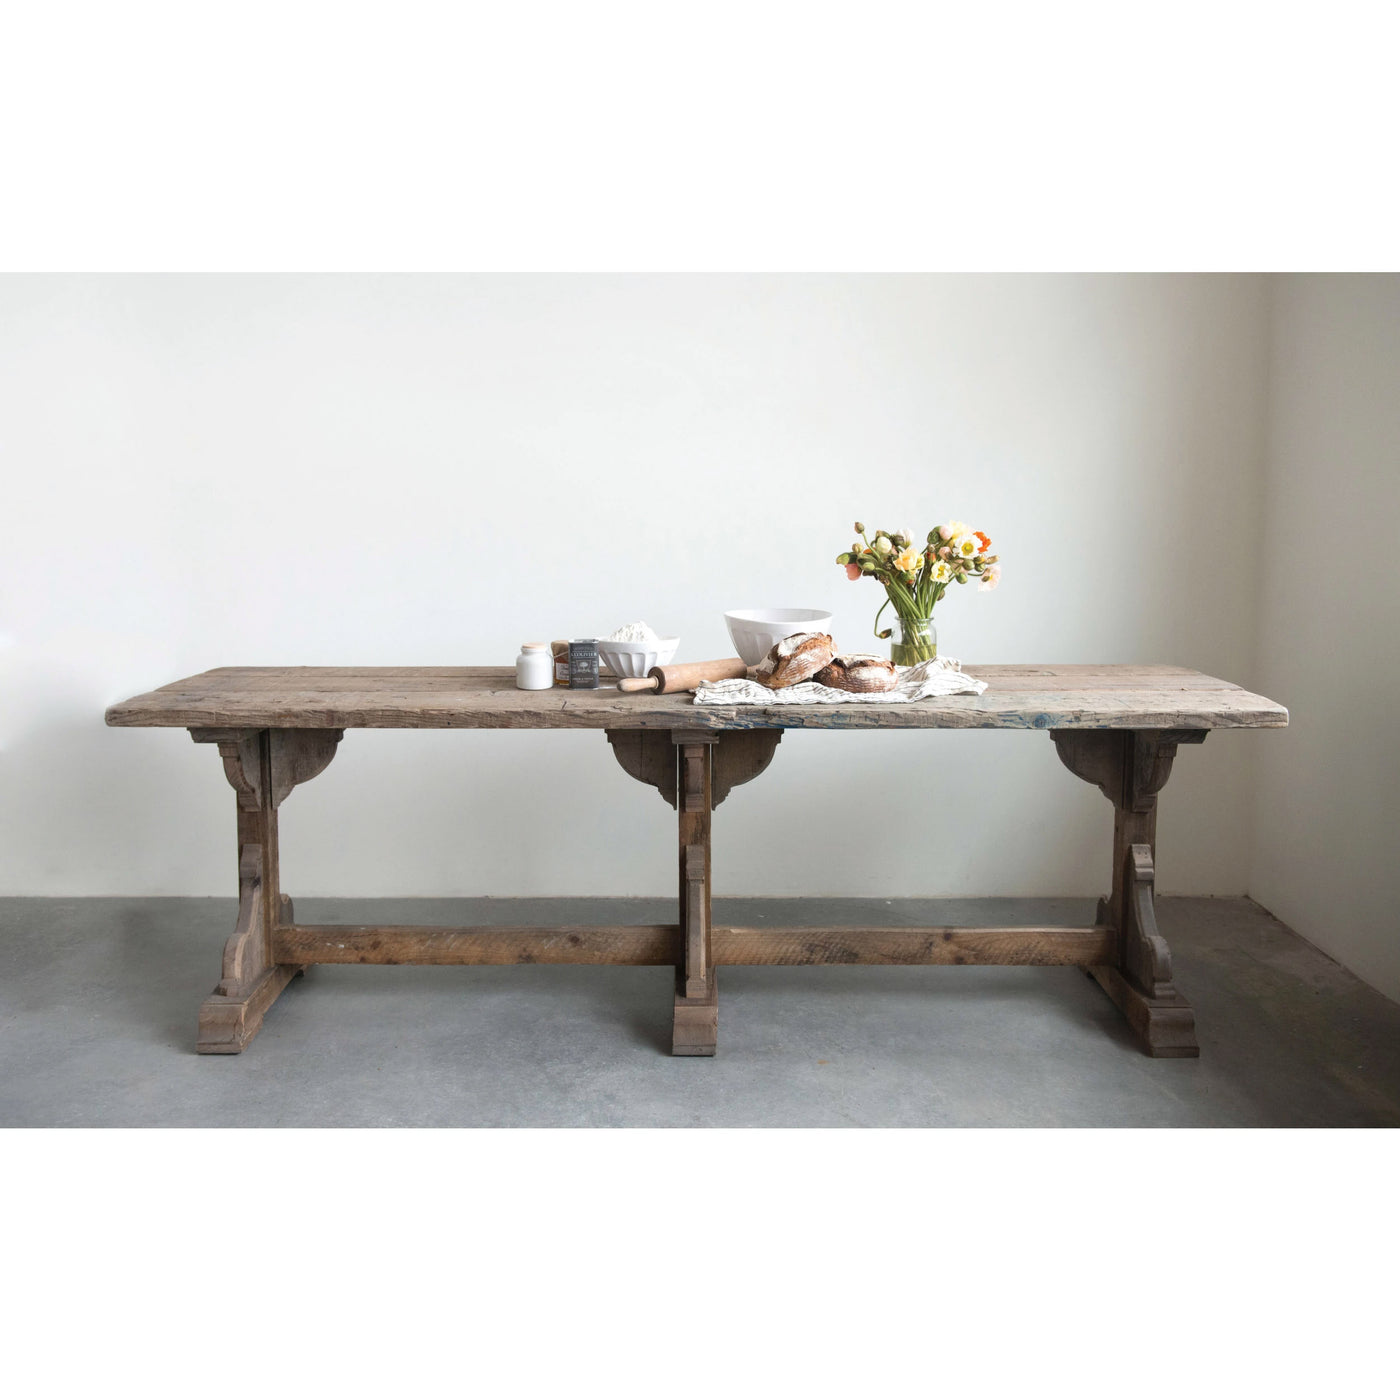 Reclaimed Wood Dining Table - More Coming